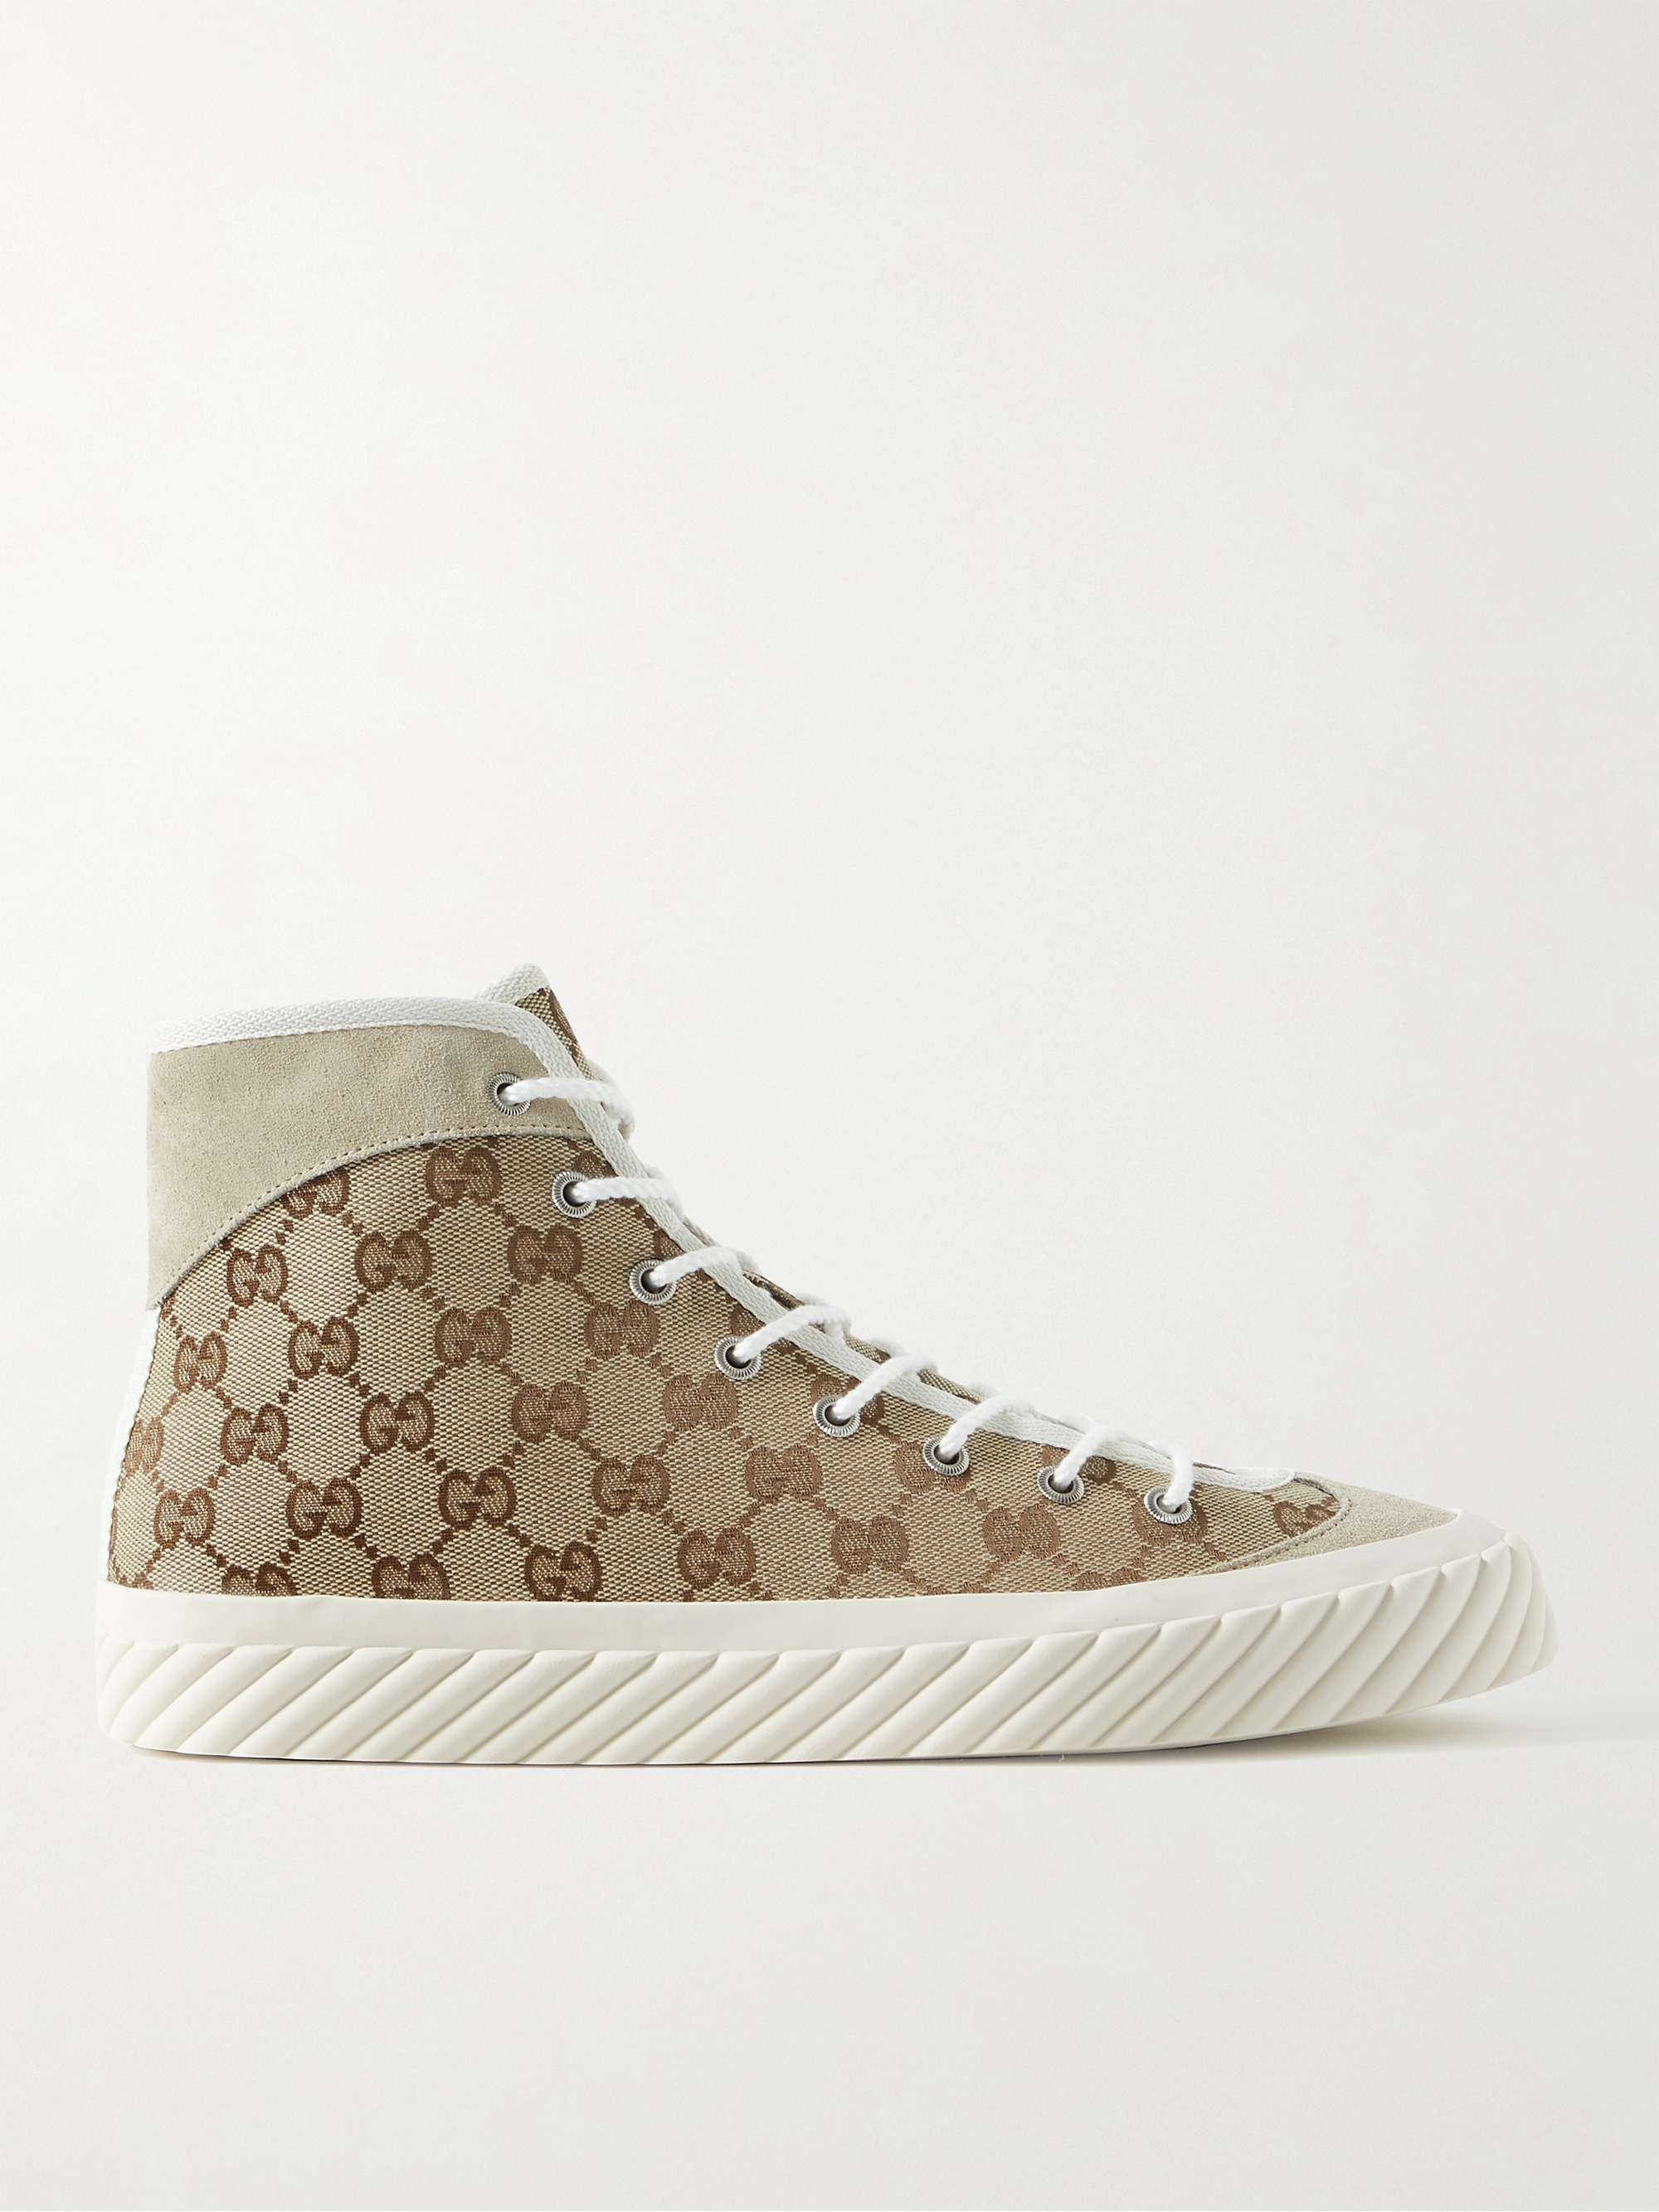 GUCCI Suede-Trimmed Monogrammed Canvas High-Top Sneakers for Men | MR PORTER